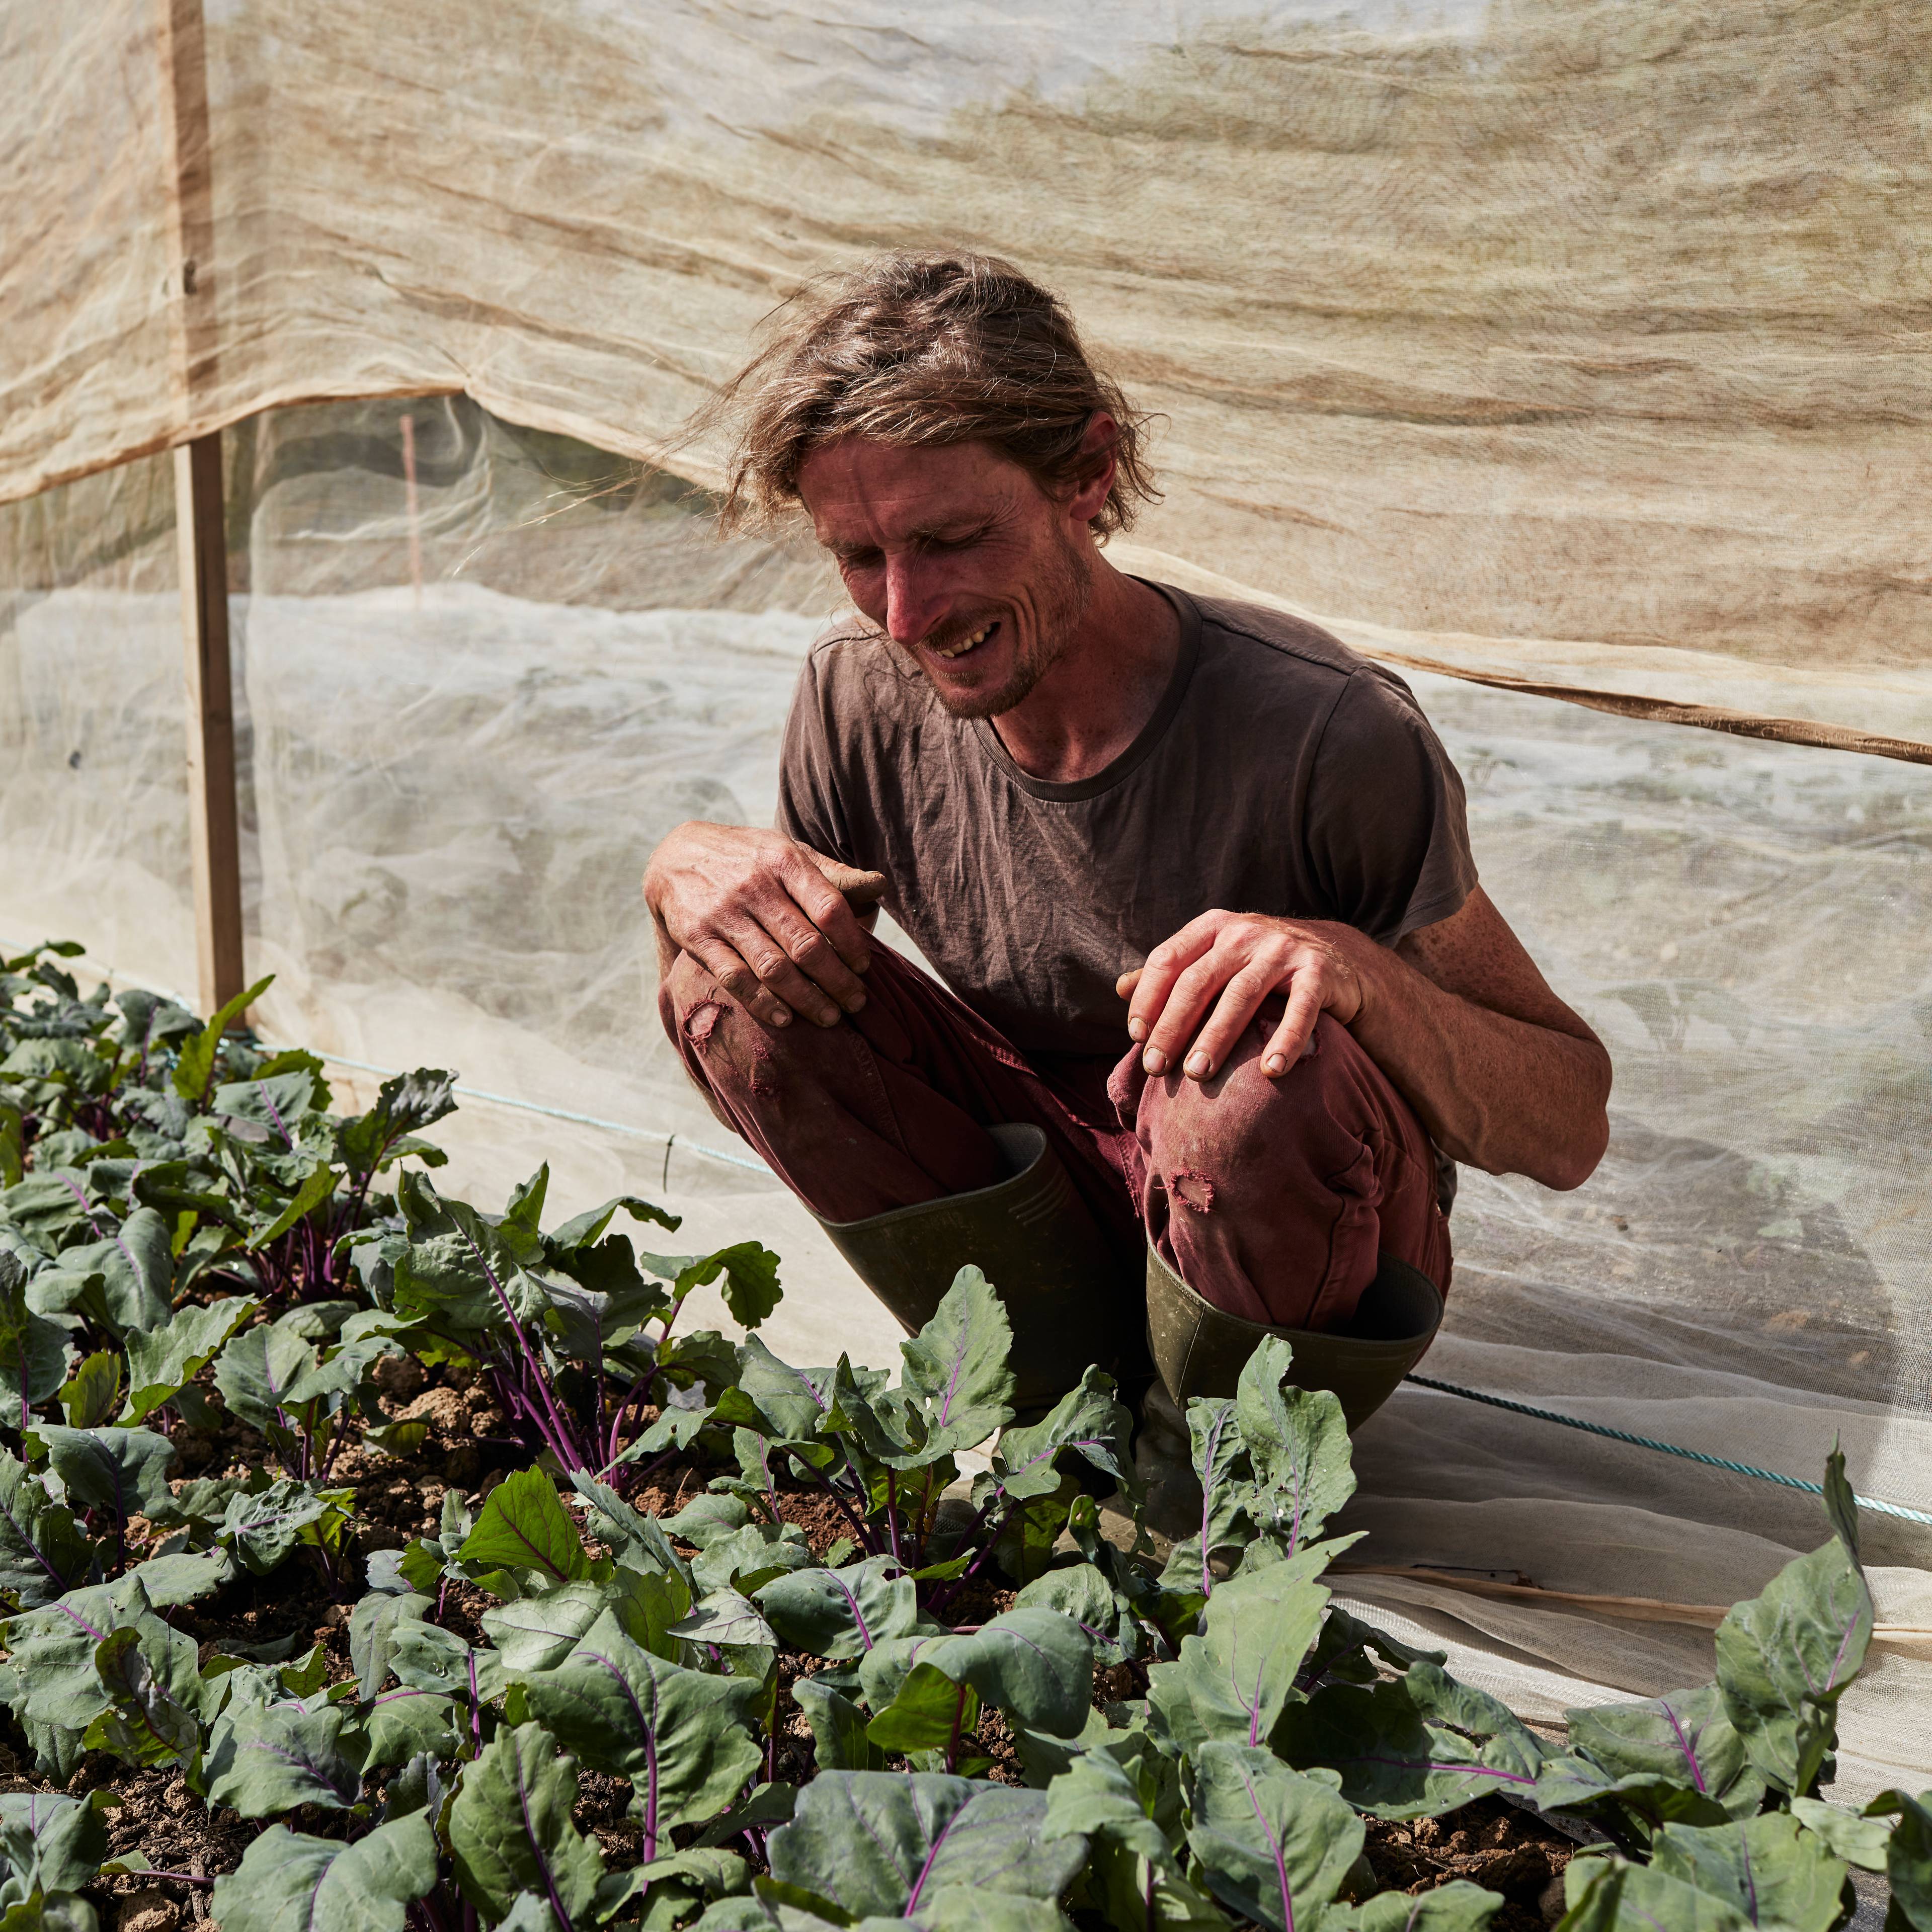 Grower Oli at his farm in Cornwall looking at his plants